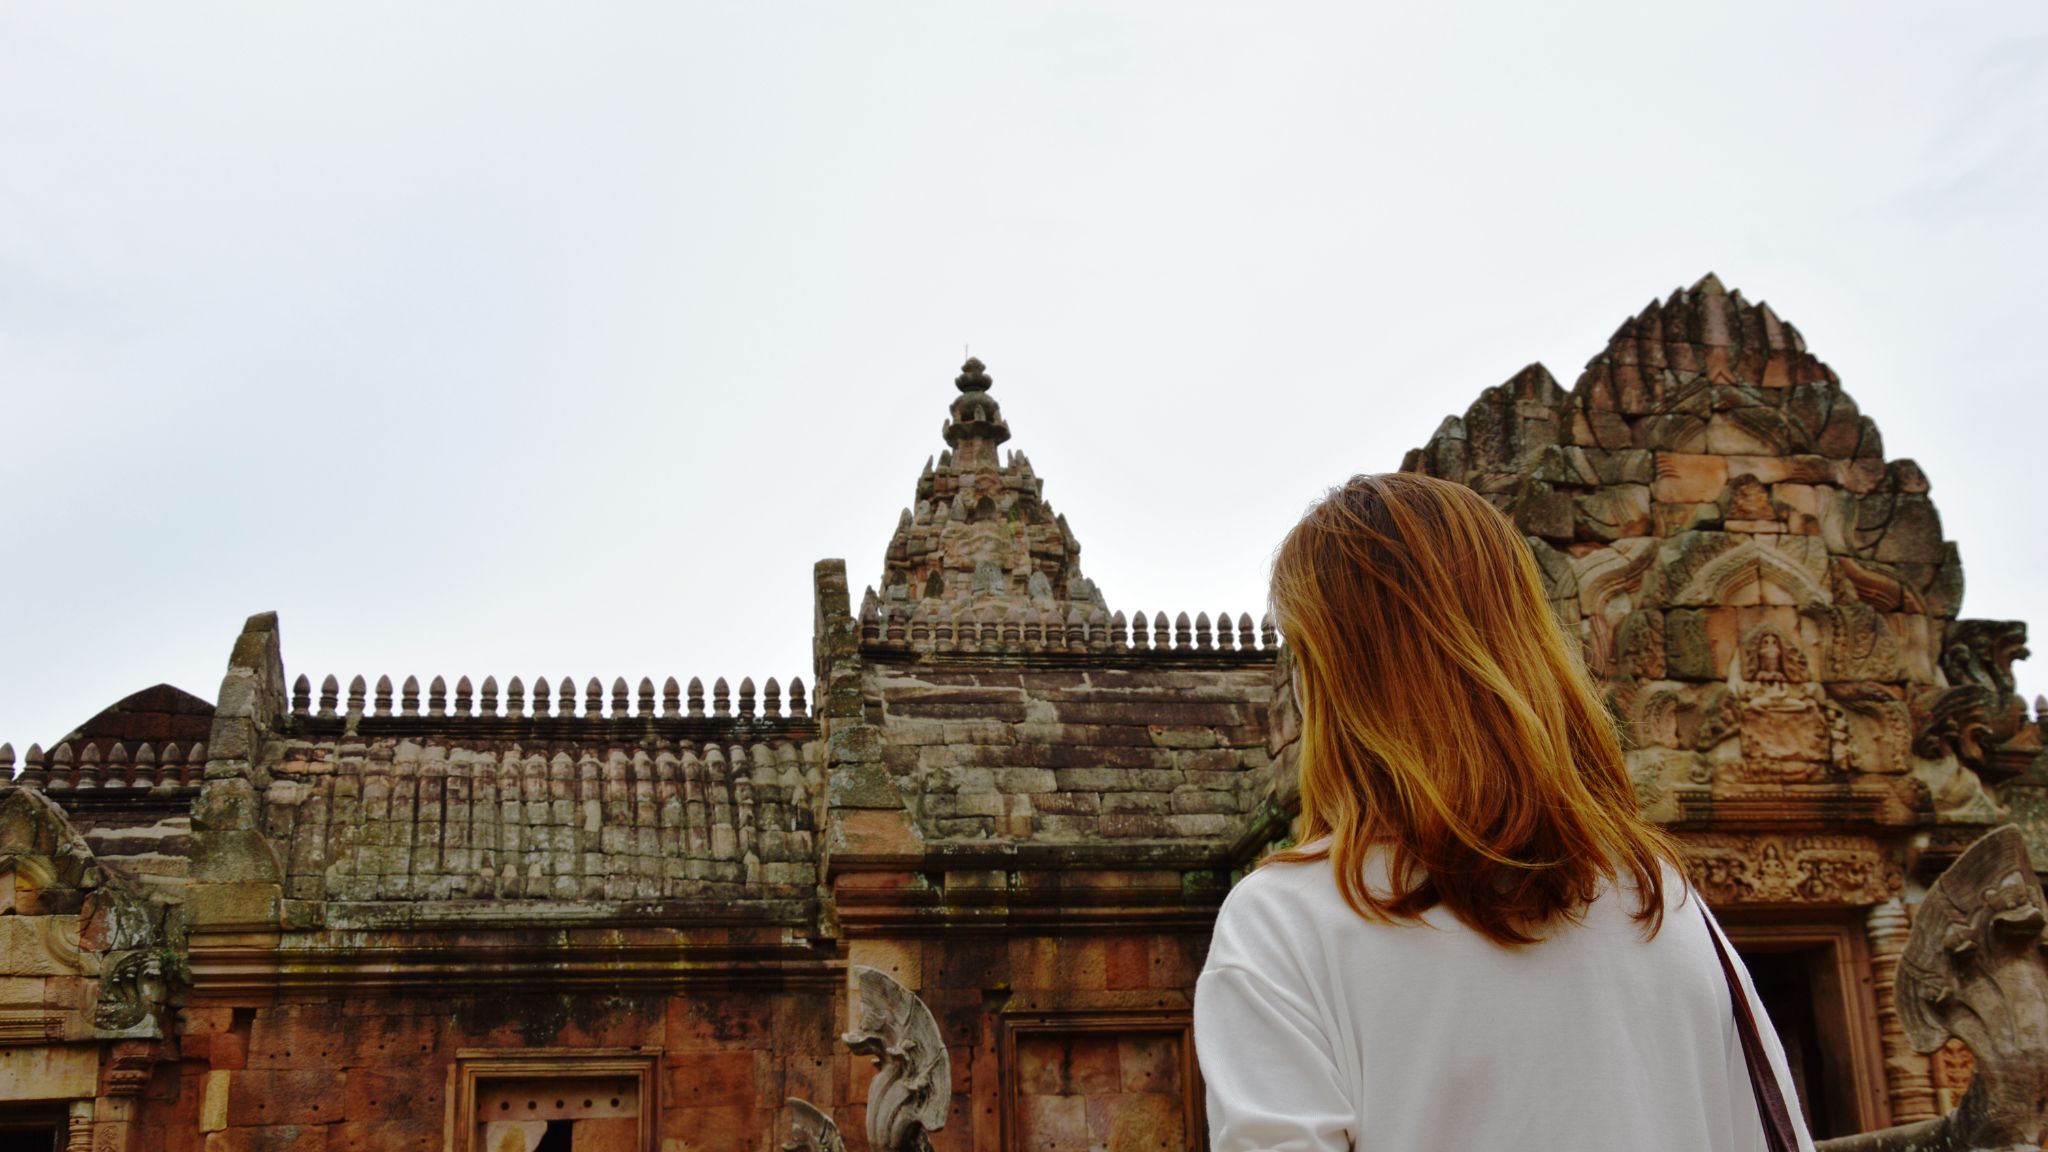 Day 4 Explore The Mysterious Phanom Rung